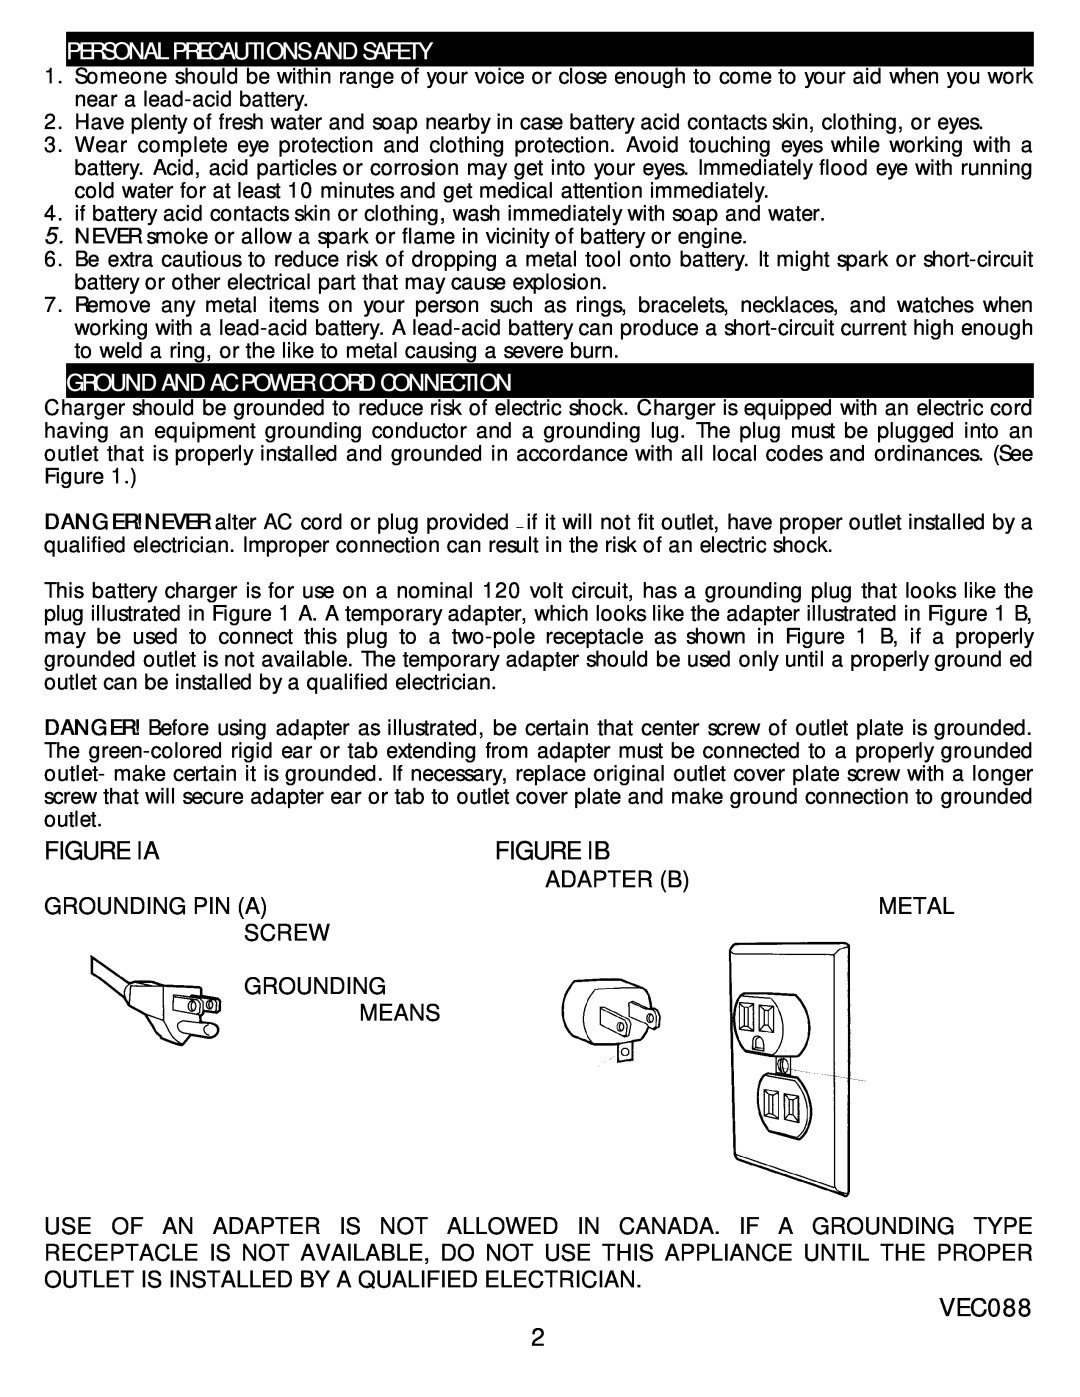 Vector VEC088 manual Personal Precautions And Safety, Ground And Ac Power Cord Connection, FIGURE lA, FIGURE lB 